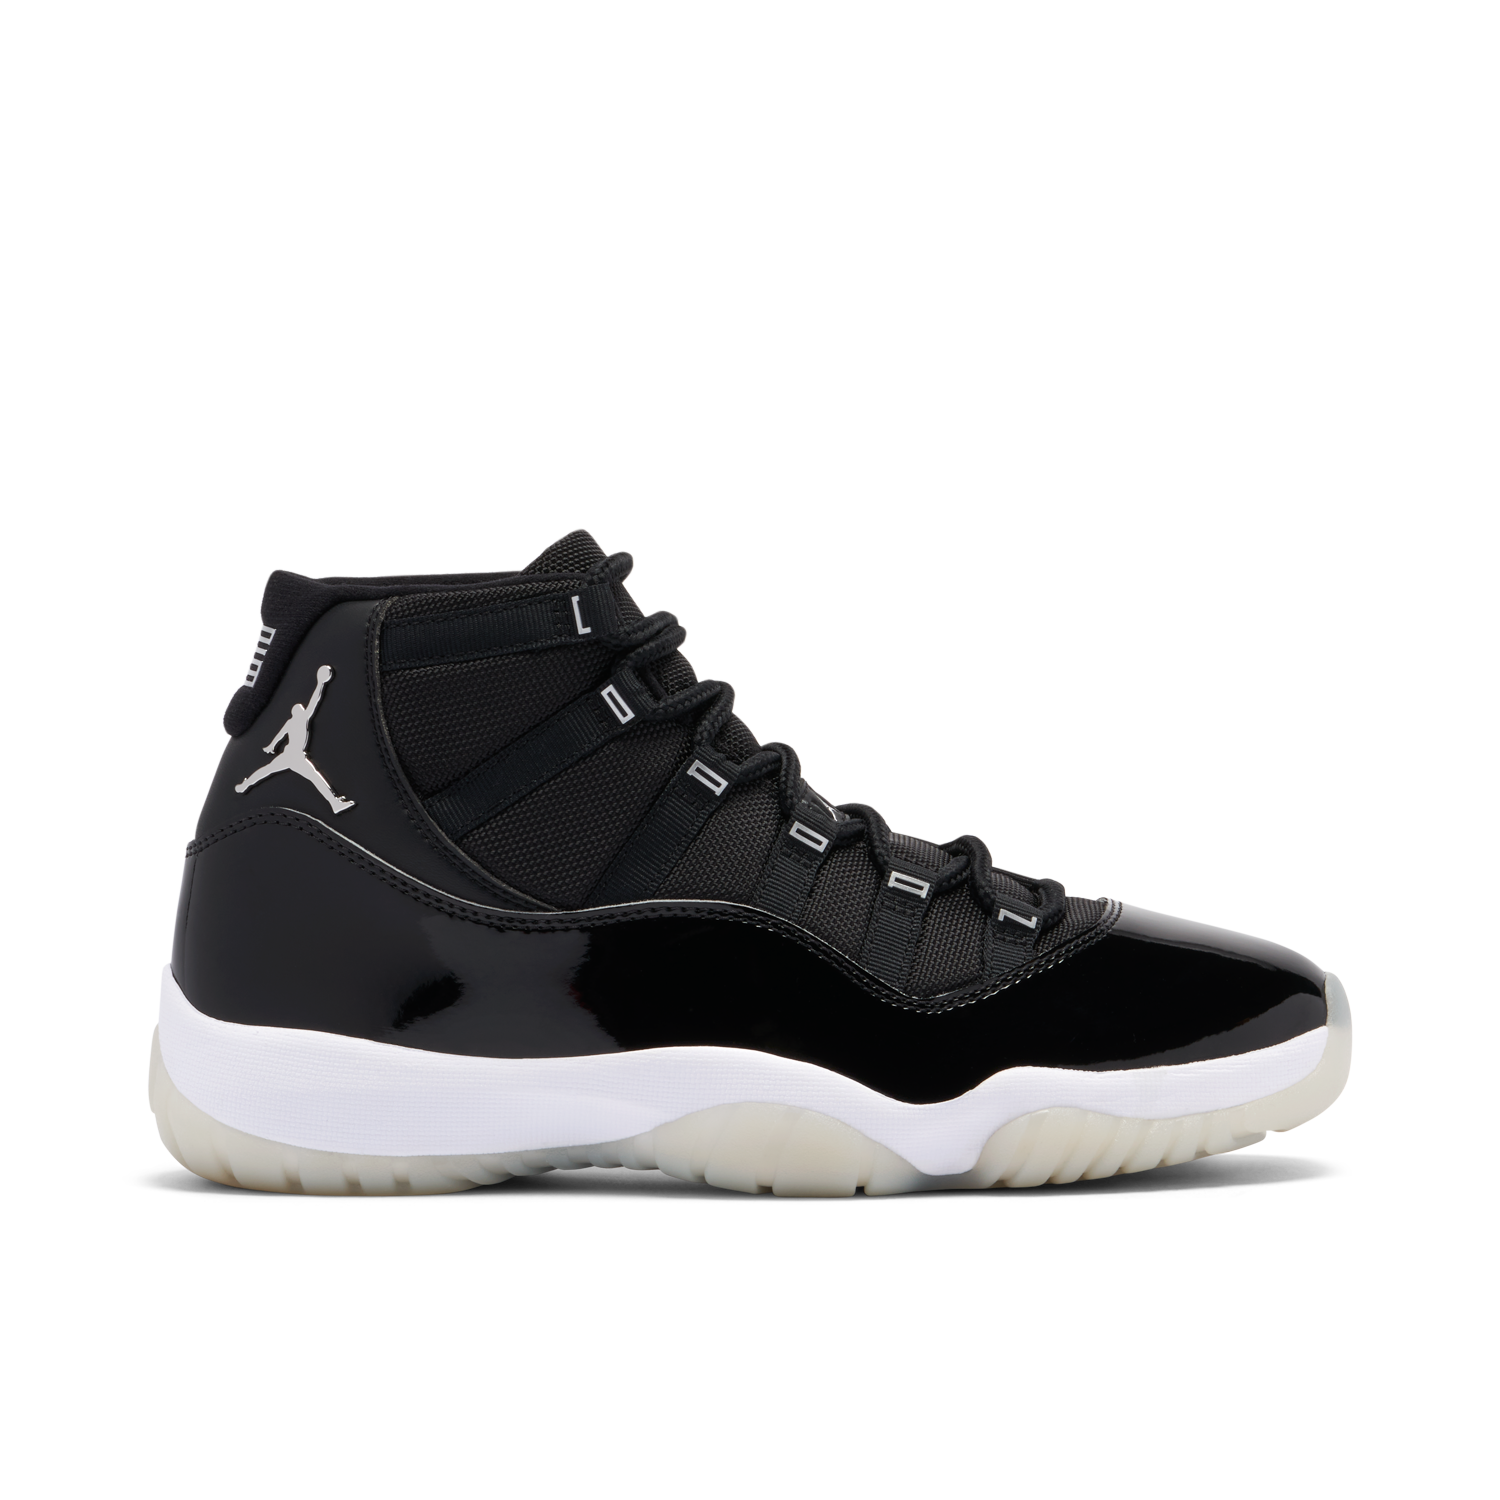 how much are the jordan 11s